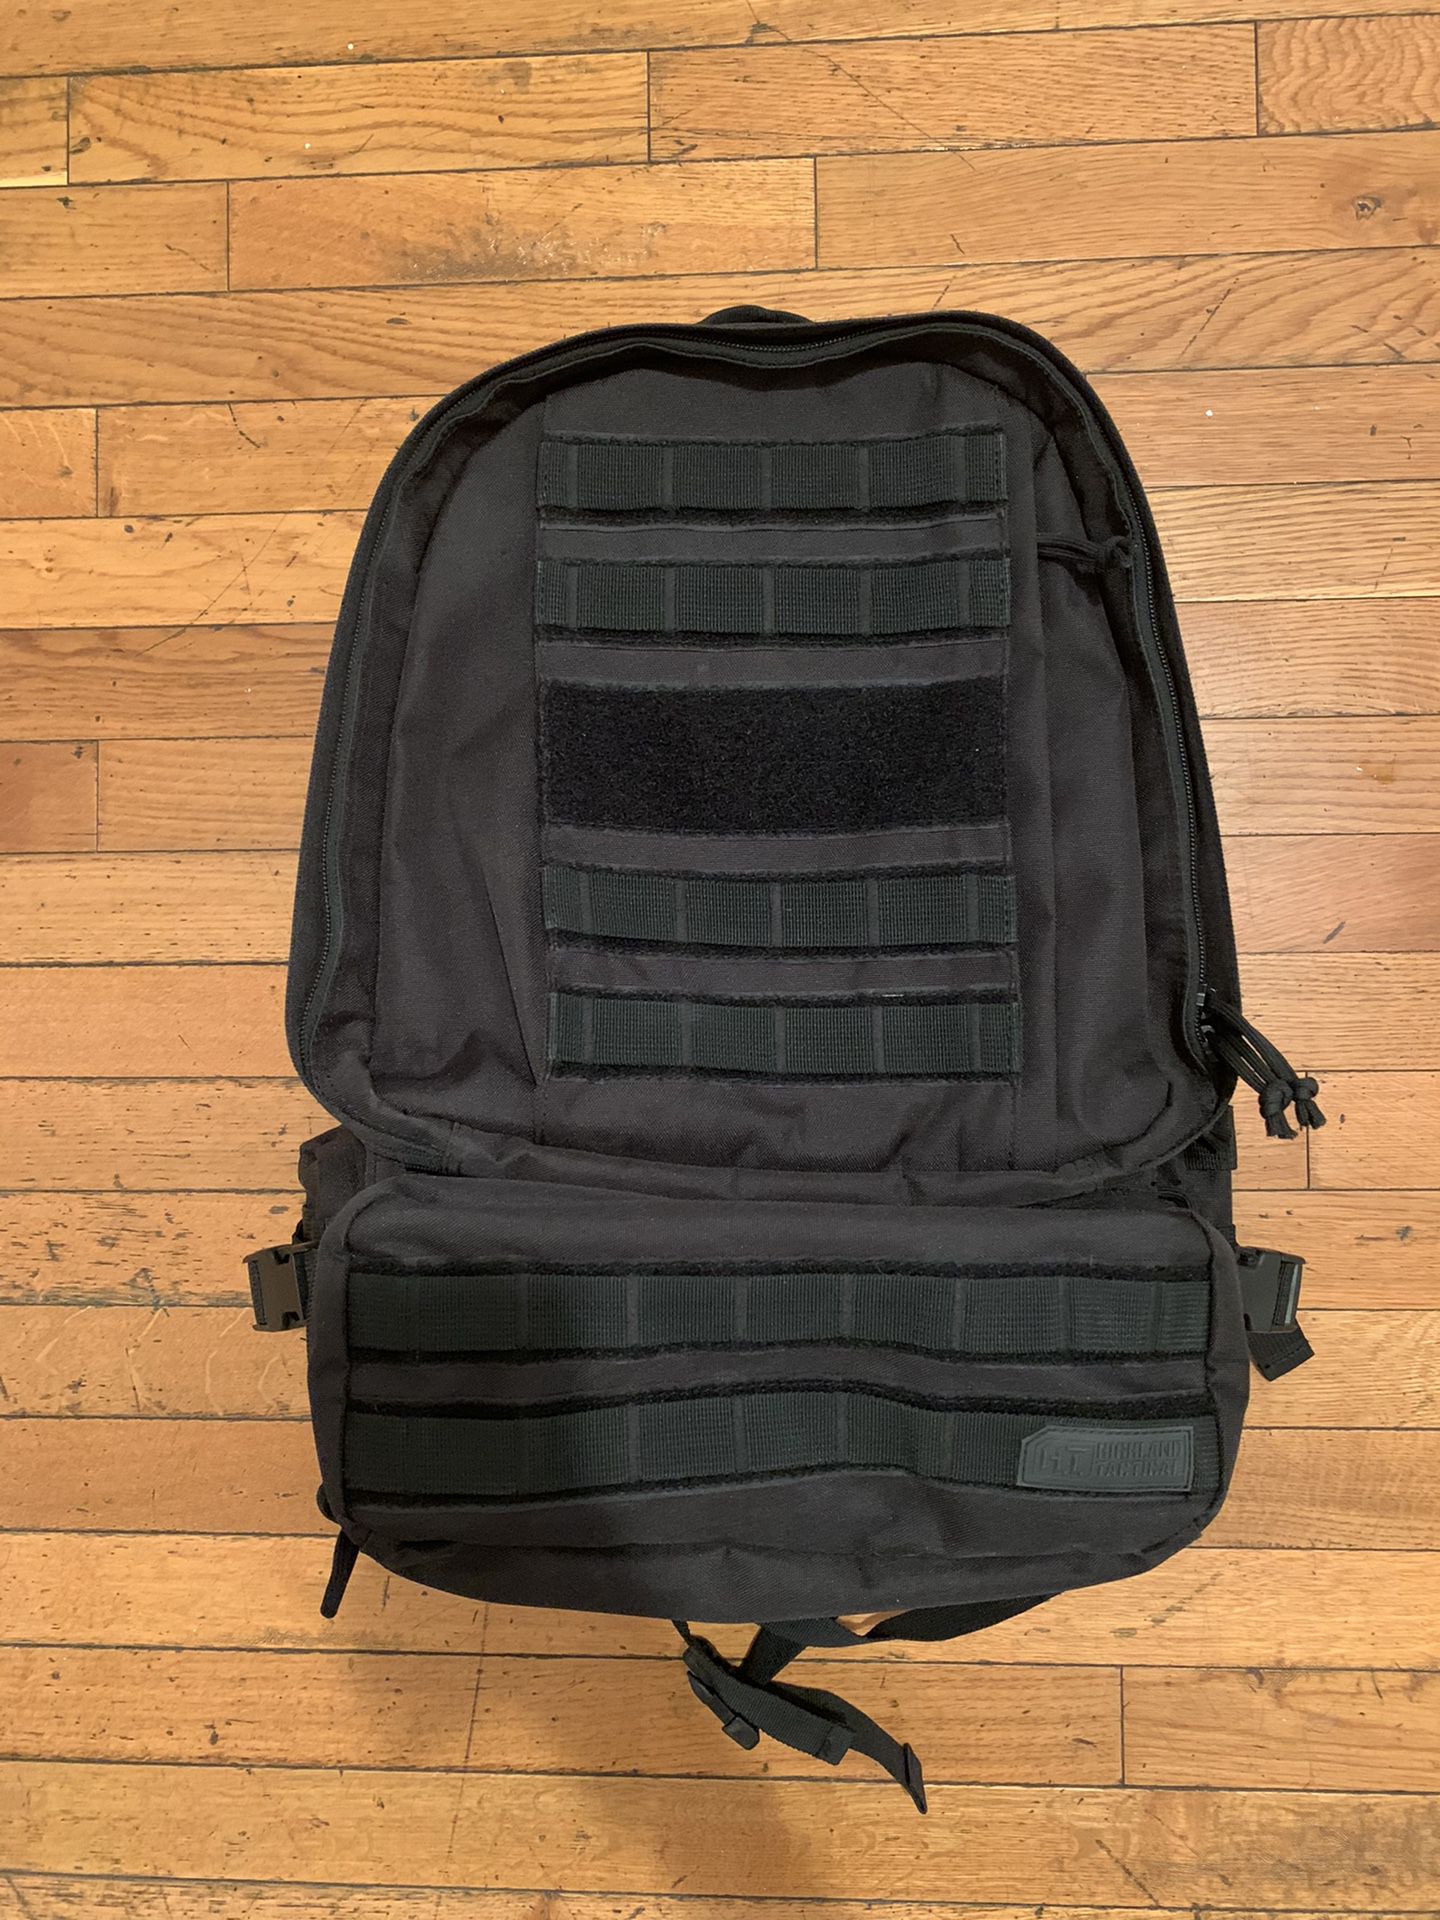 Highland Tactical Apollo Heavy Duty Tactical Backpack!